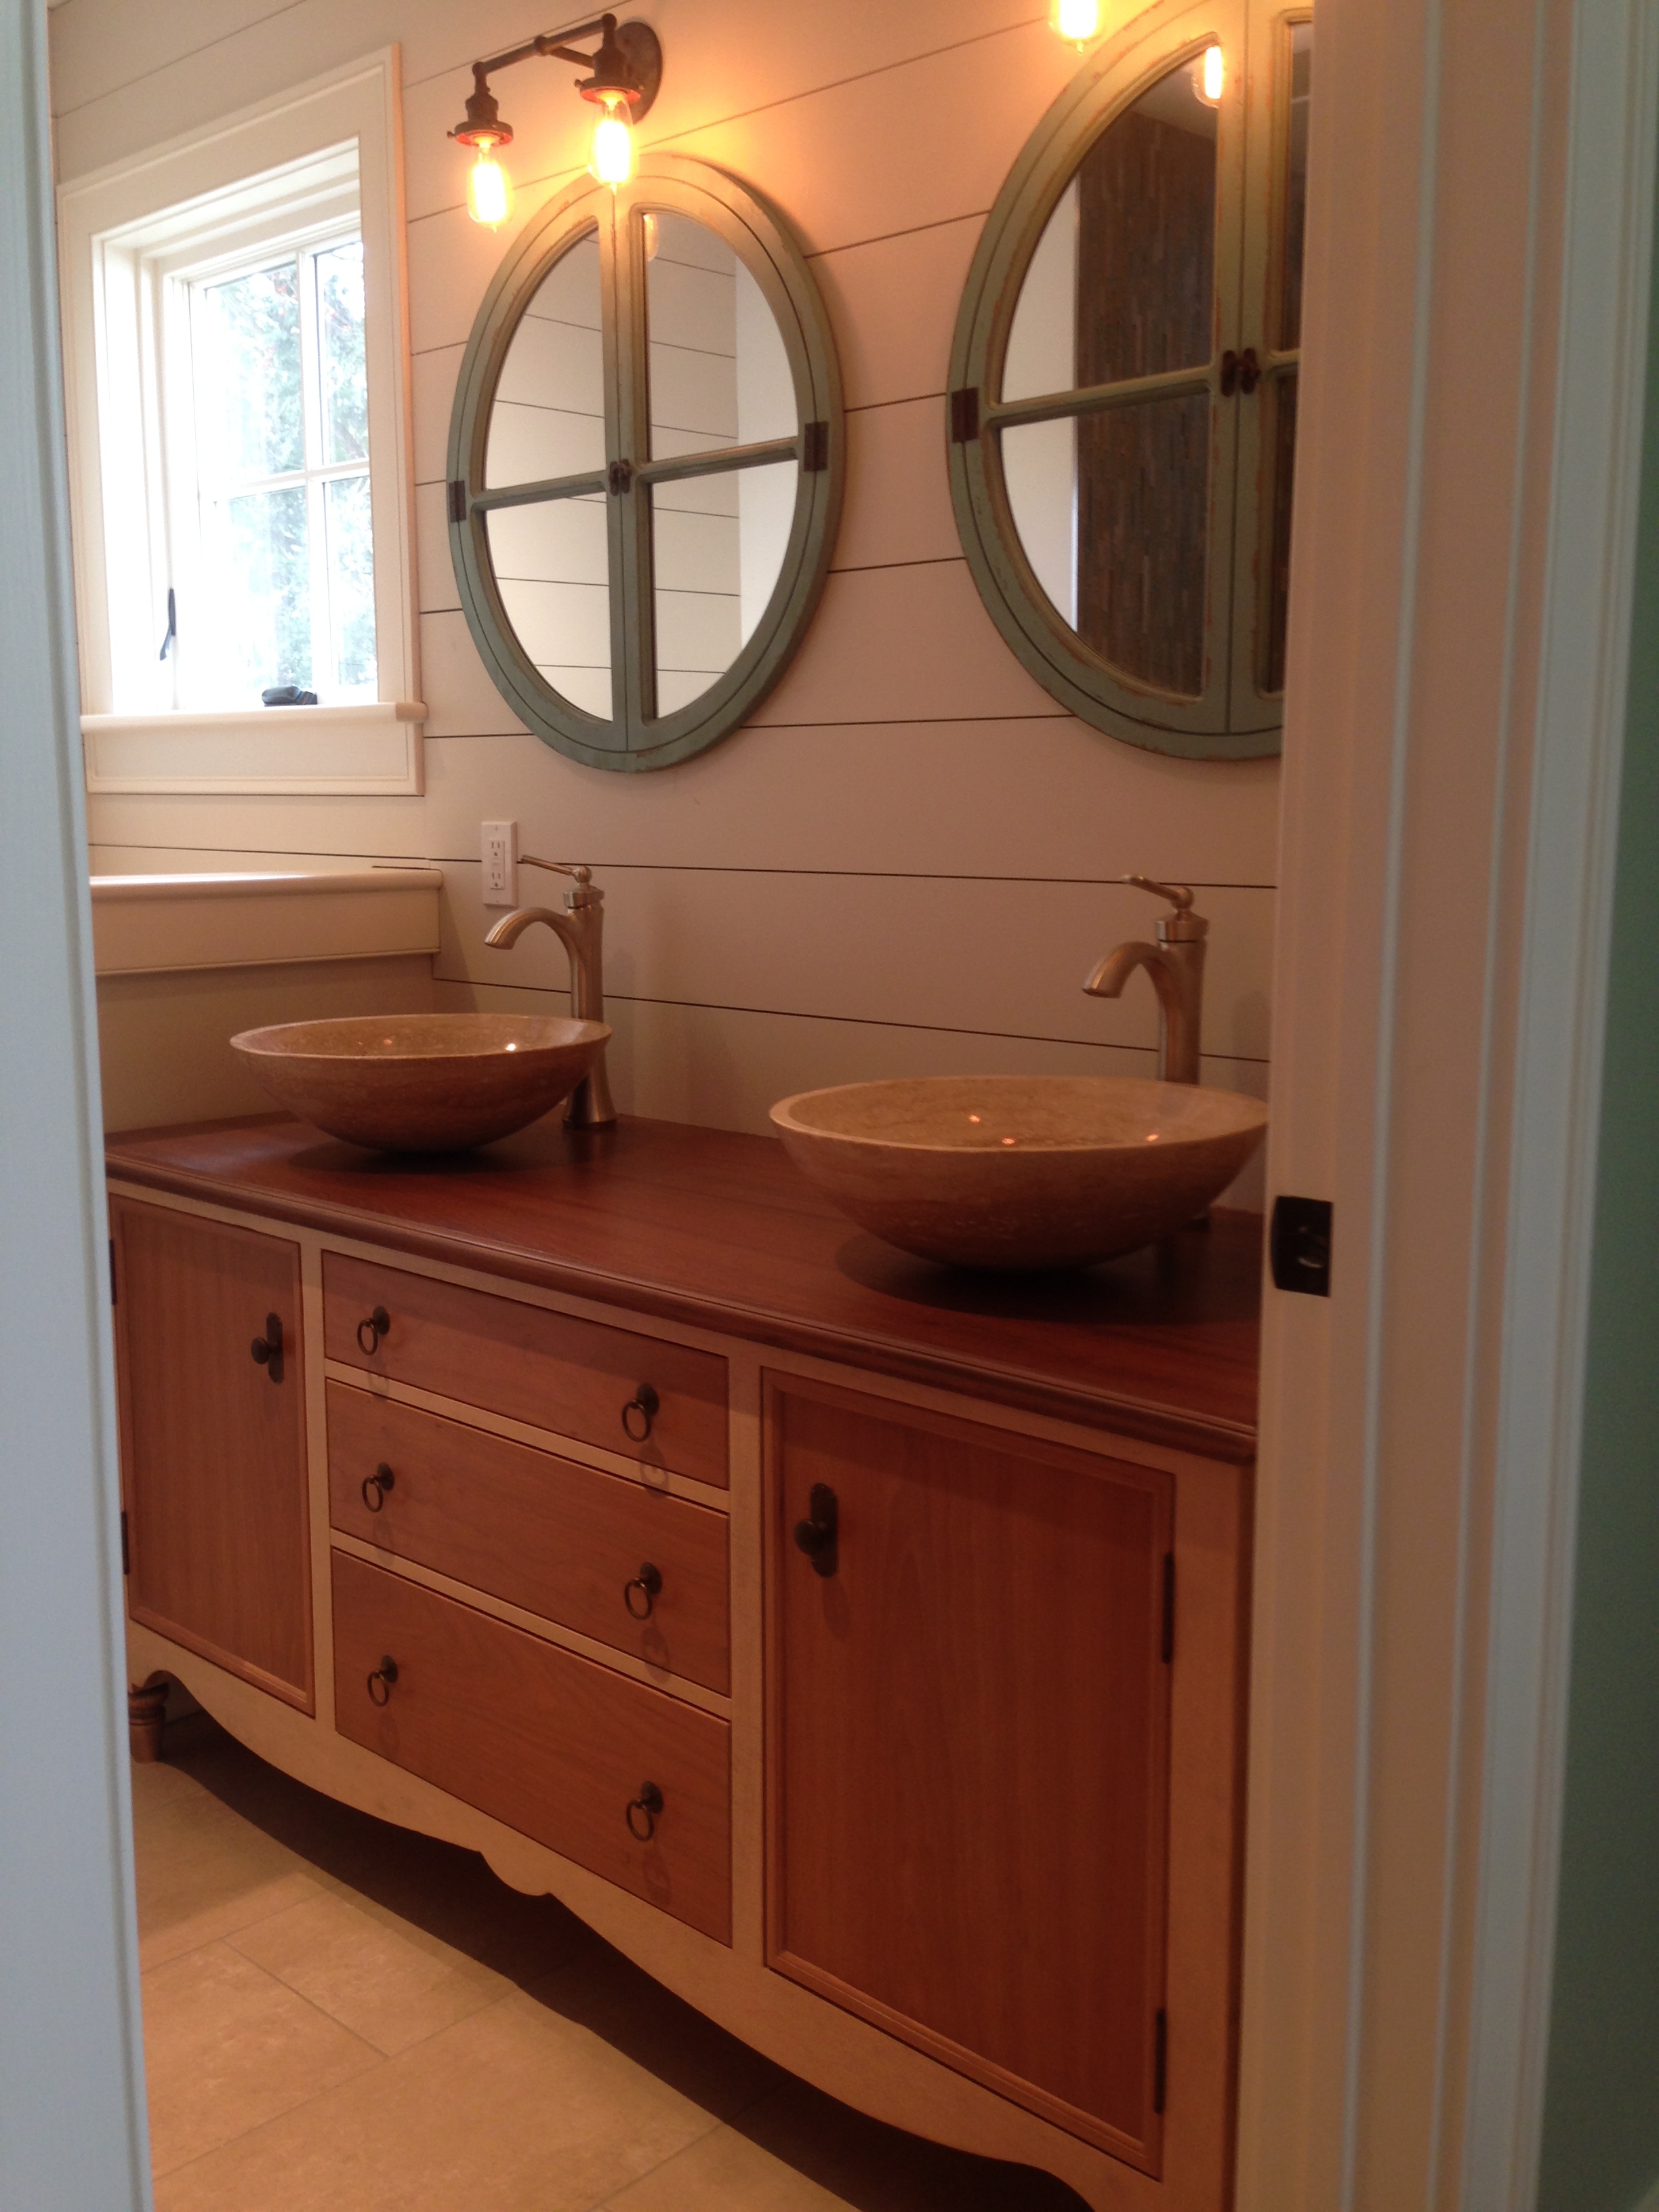 Master Bath Vanity of Maple and Cherry, with Mahogany Top, and Travertine Vessel Sinks 1.jpg